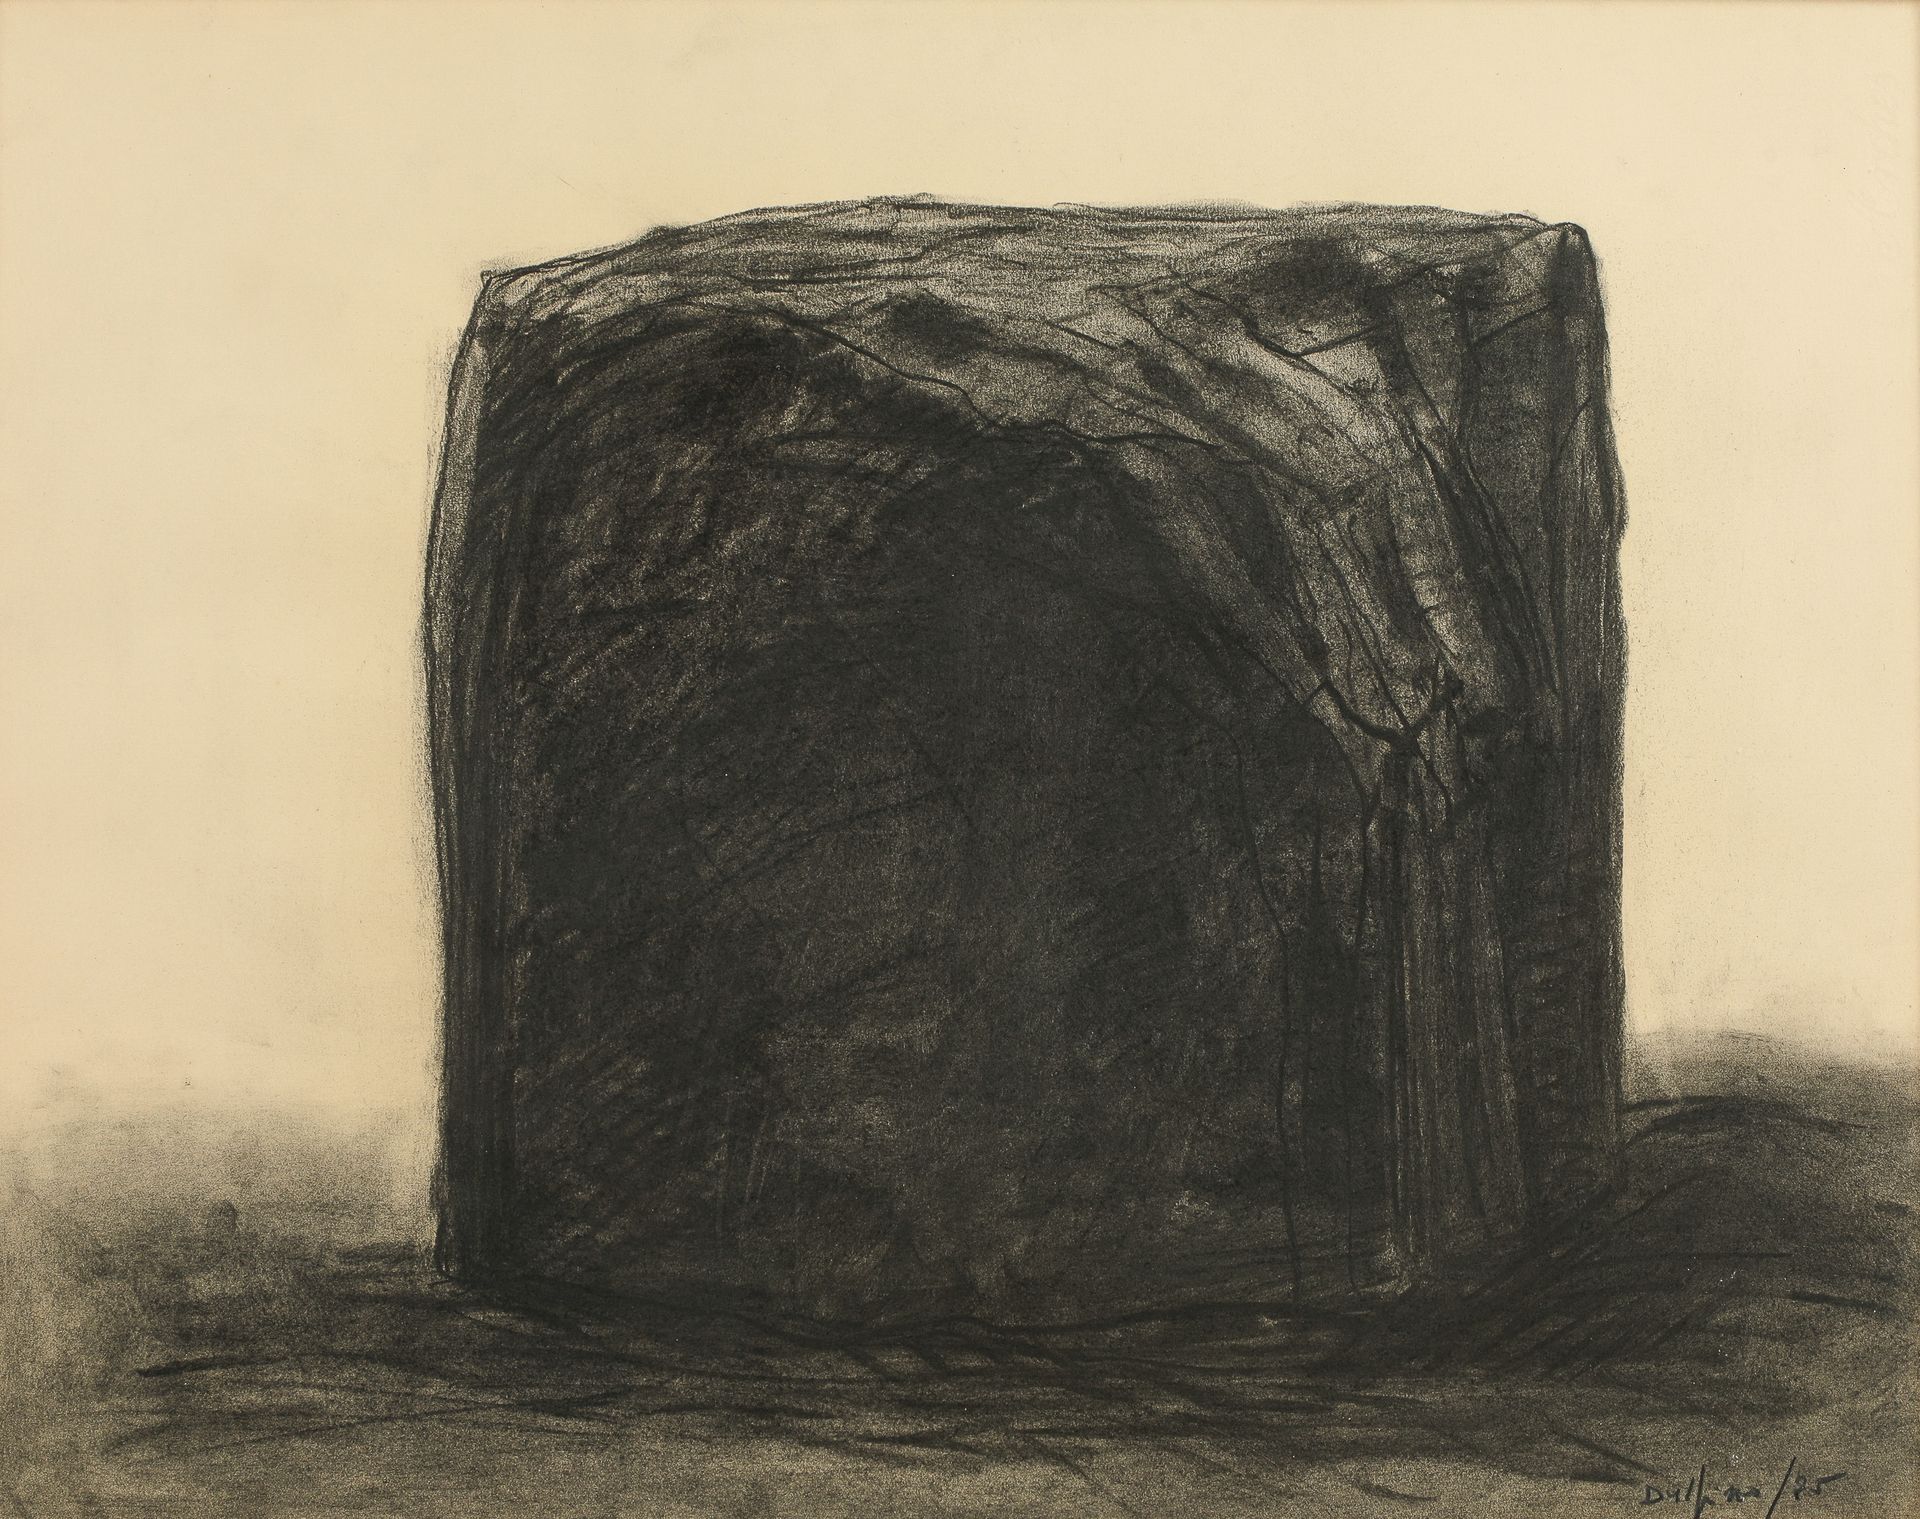 Null CUBE

Pastel and charcoal drawing, signed

44x55cm